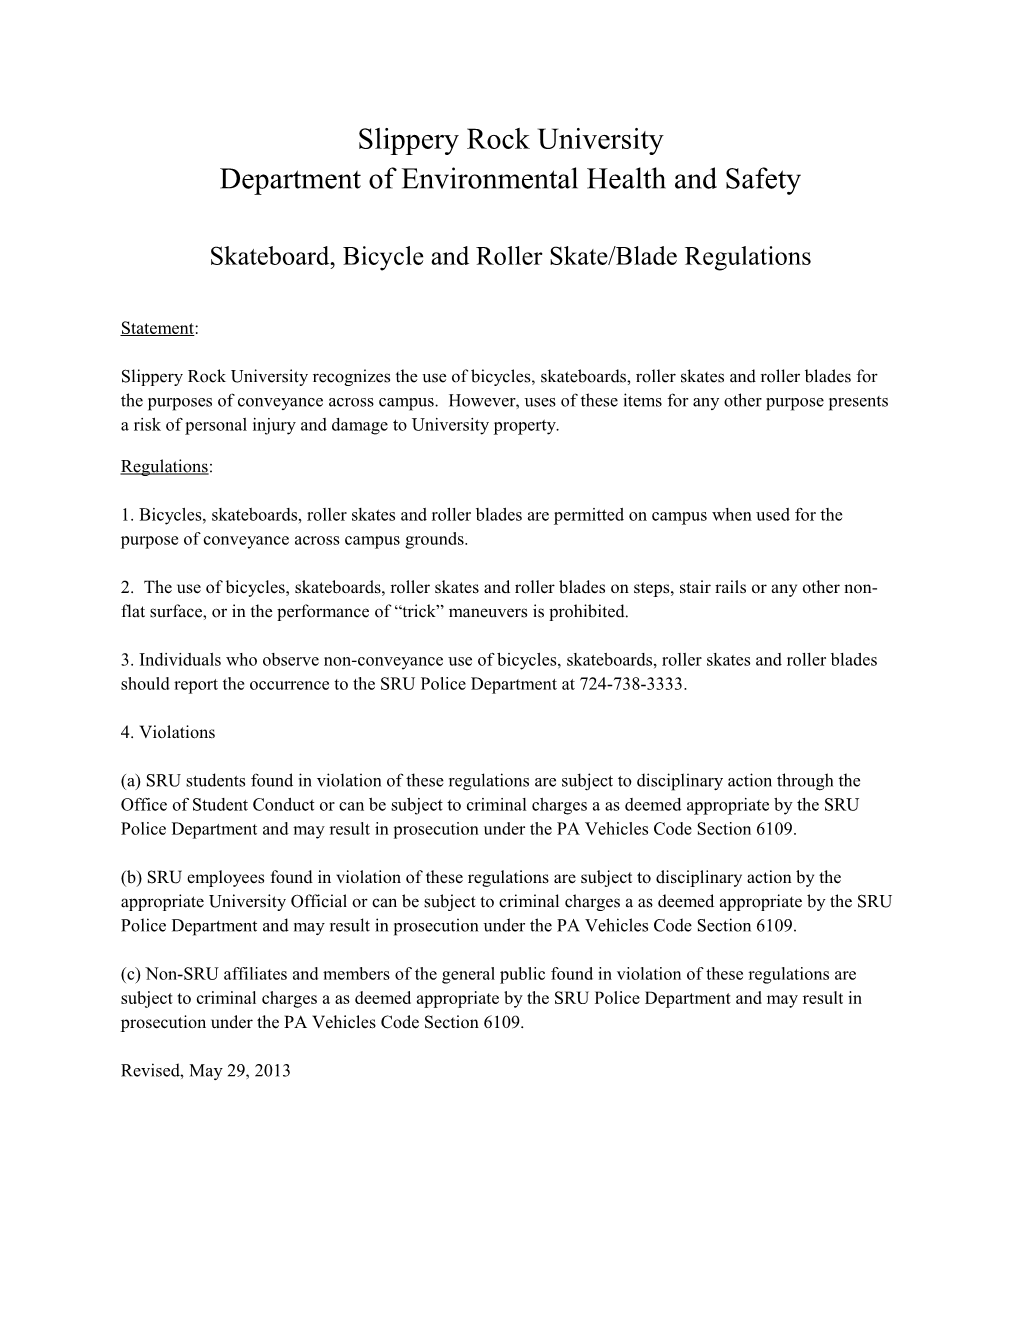 Department of Environmental Health and Safety